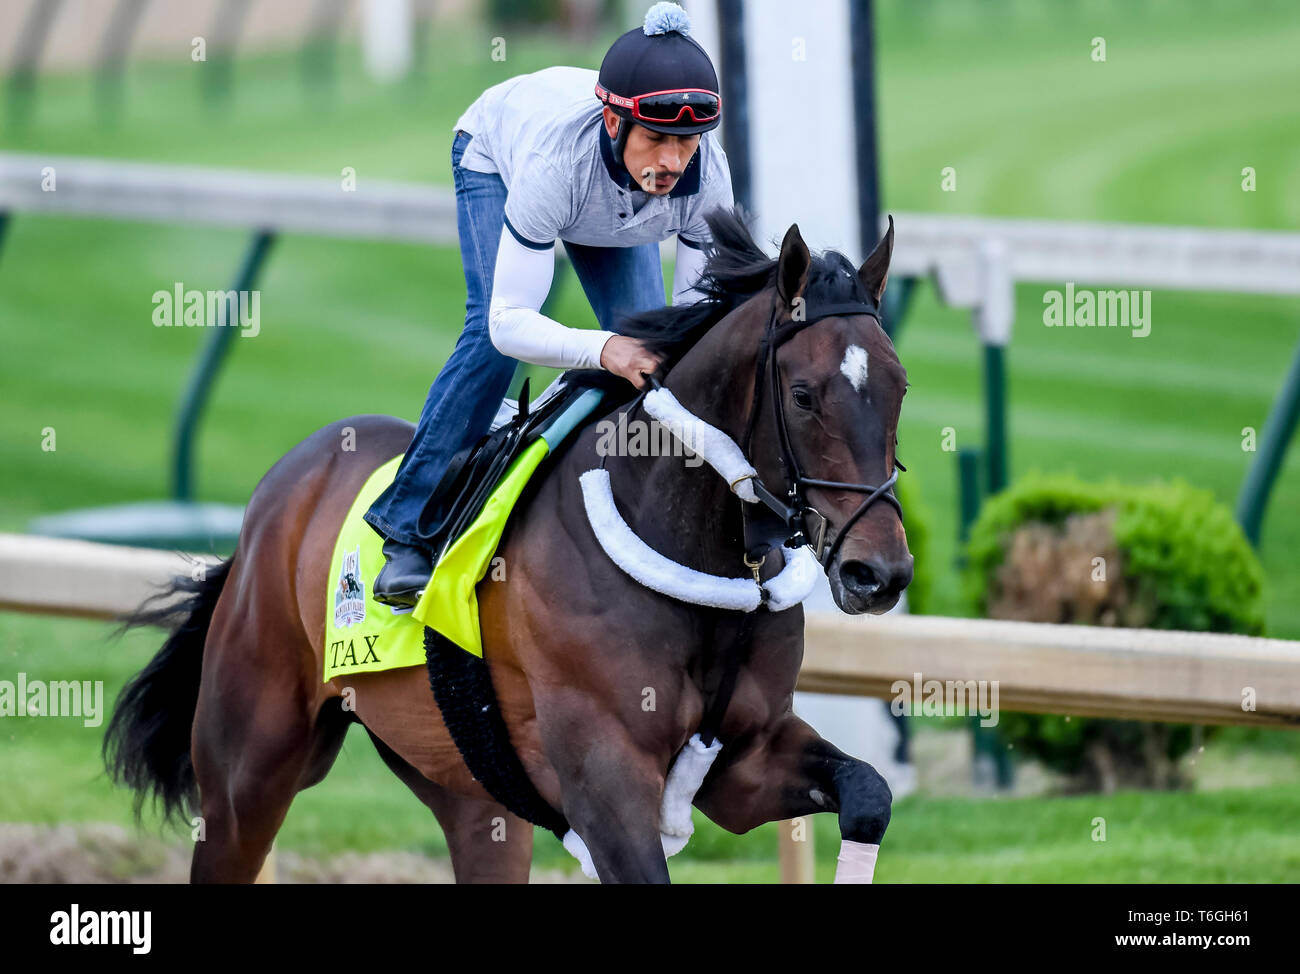 Louisville, Kentucky, USA. 30th Apr, 2019. Tax, trained by Danny Gargan, exercises in preparation for the Kentucky Derby at Churchill Downs in Louisville, Kentucky on April 30, 2019. Credit: csm/Alamy Live News Stock Photo